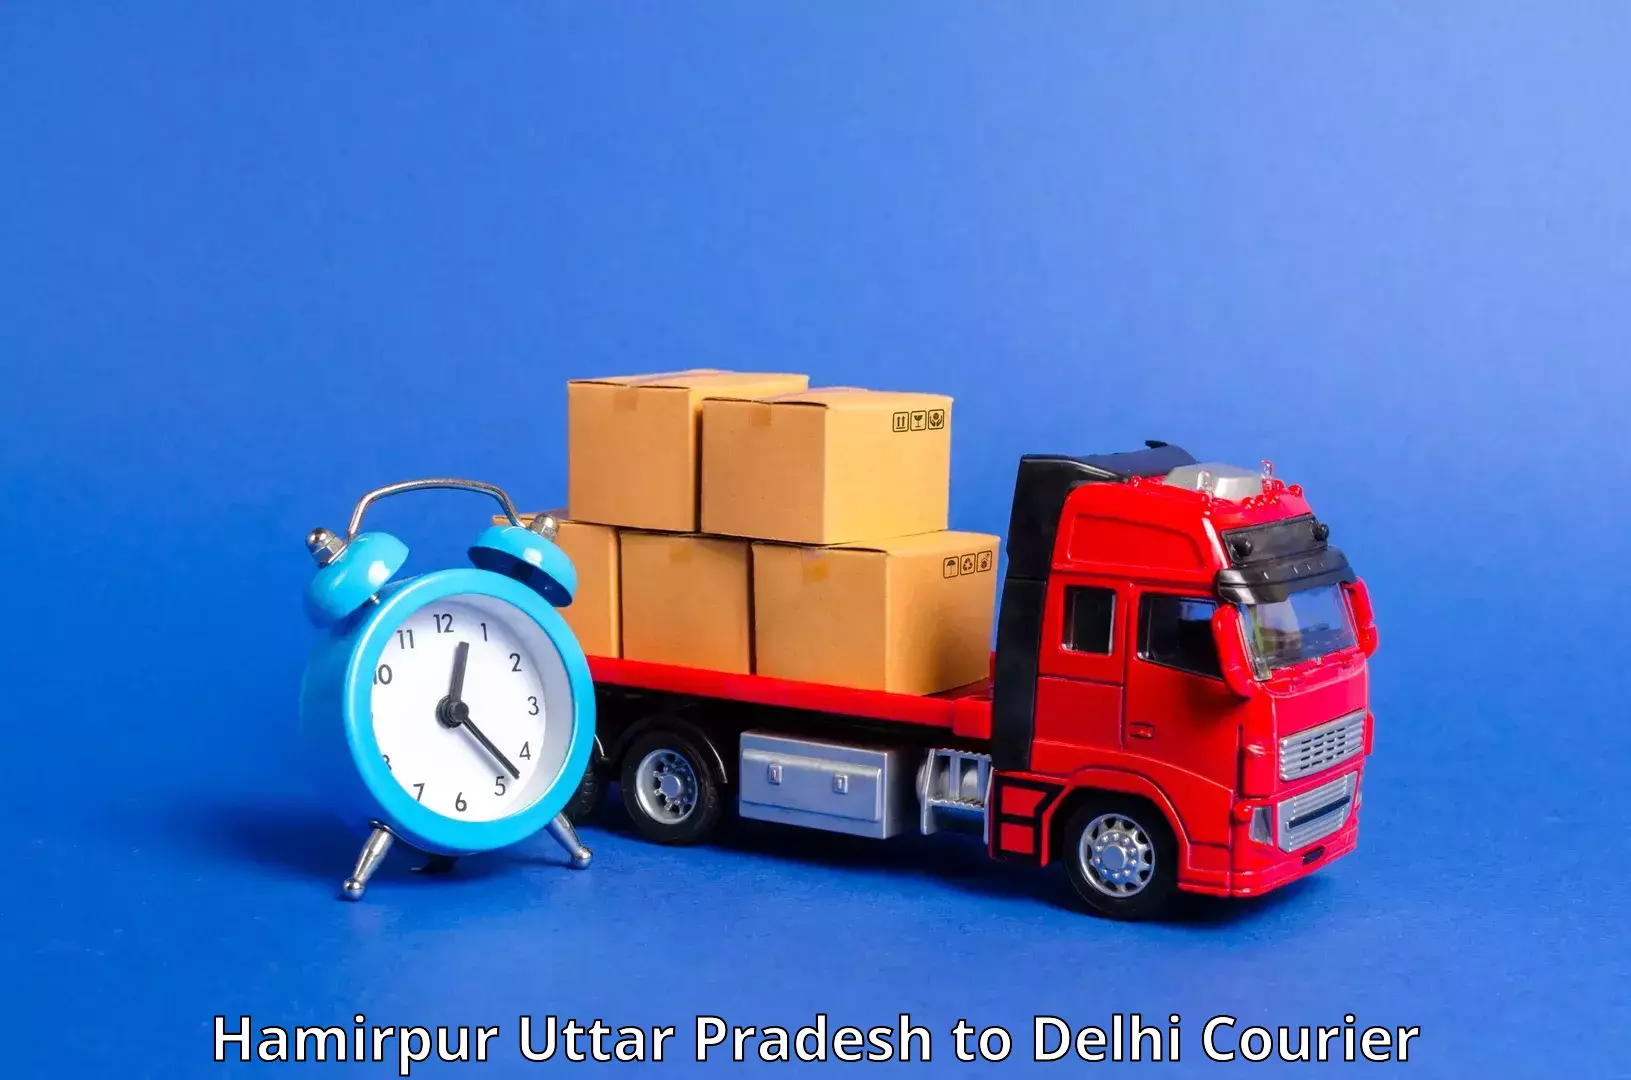 Small business couriers Hamirpur Uttar Pradesh to Lodhi Road